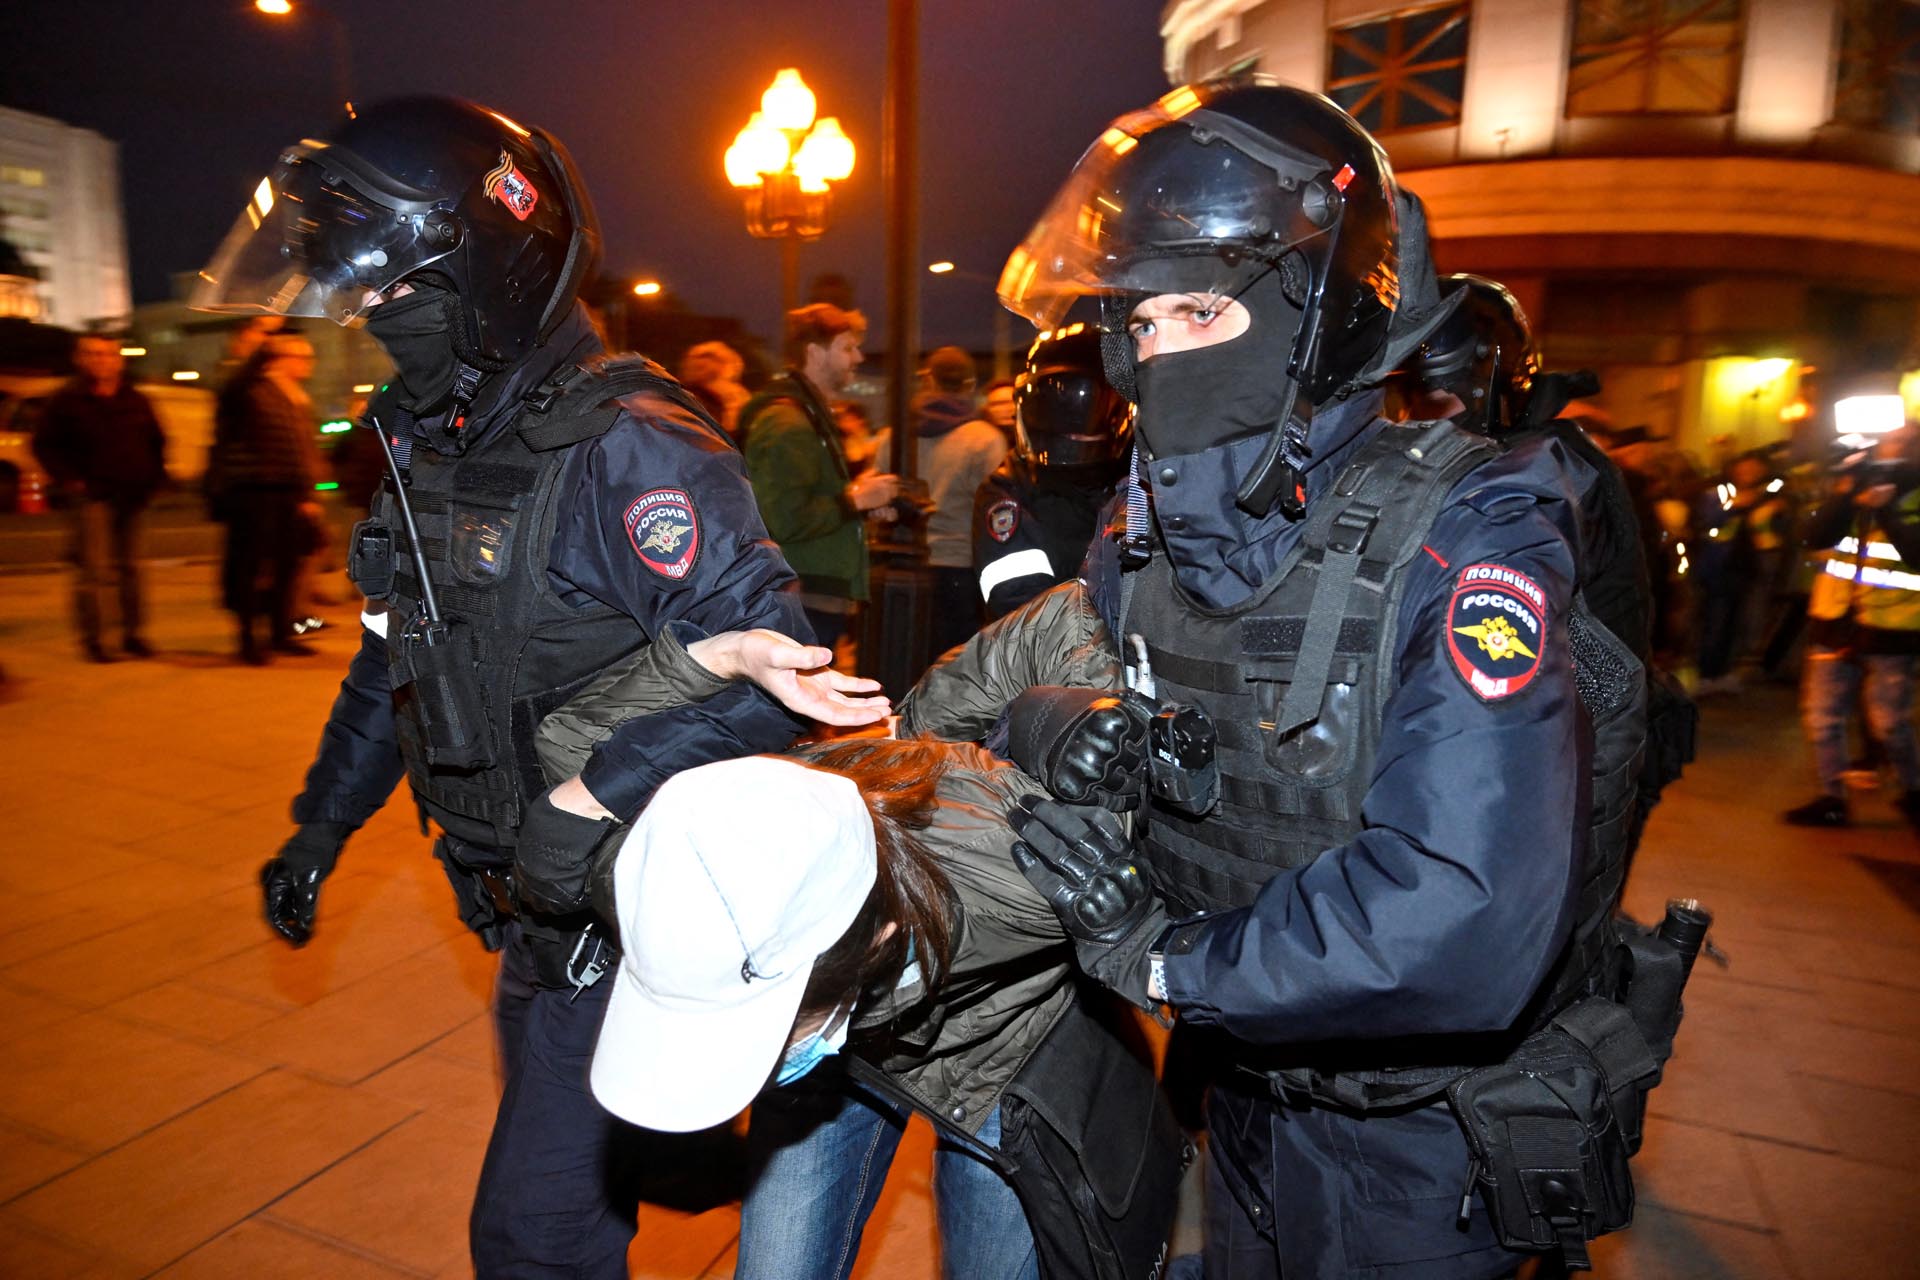 Those arrested face up to 15 years in prison (Photo by Alexander NEMENOV / AFP)